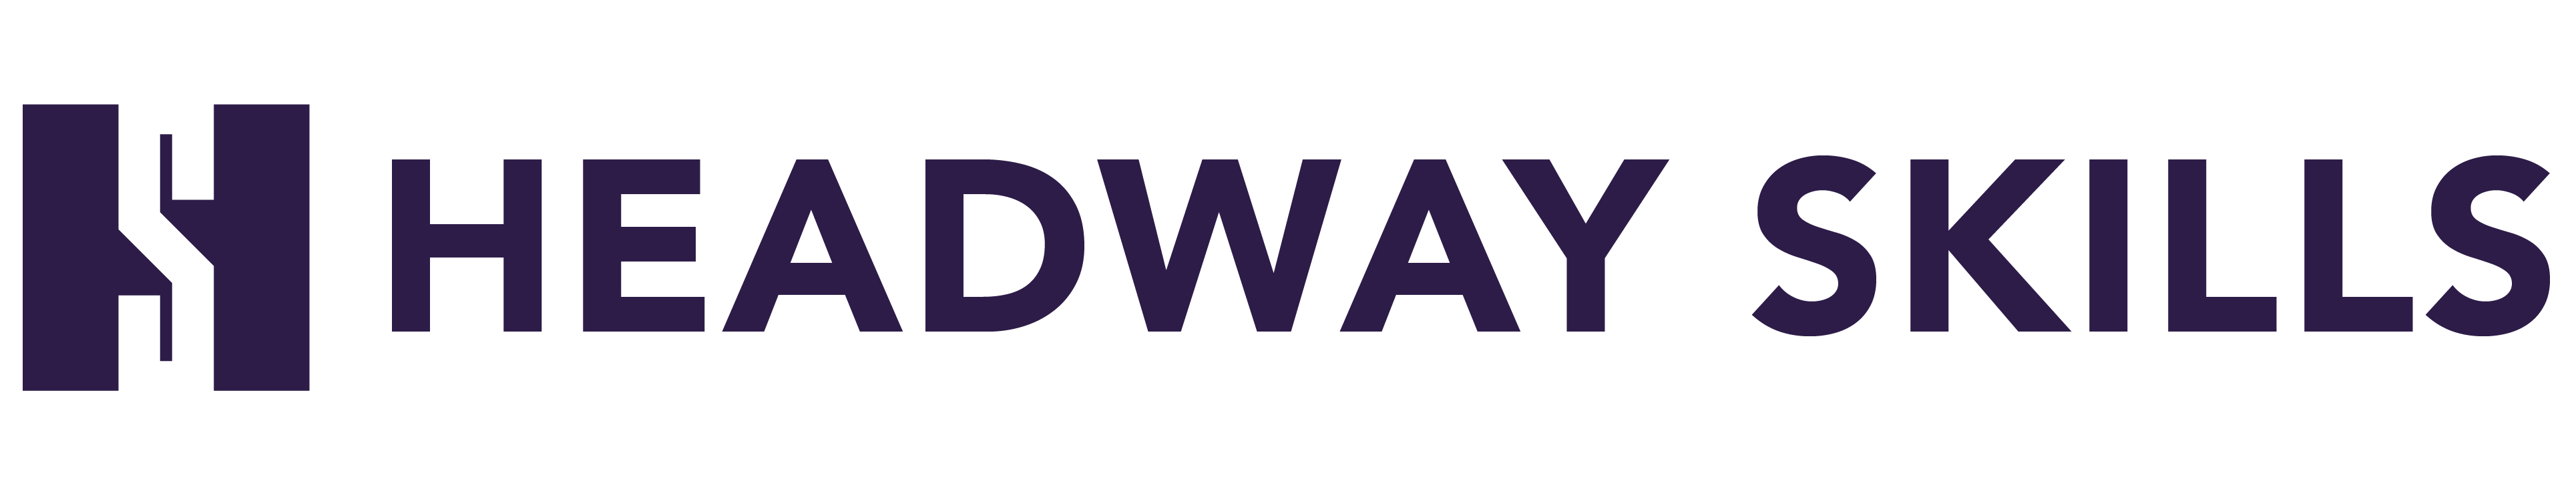 HeadwaySkills Logo, publisher of the book "12 Universal Skills: A Beginner’s Guide to a Successful Work Life"